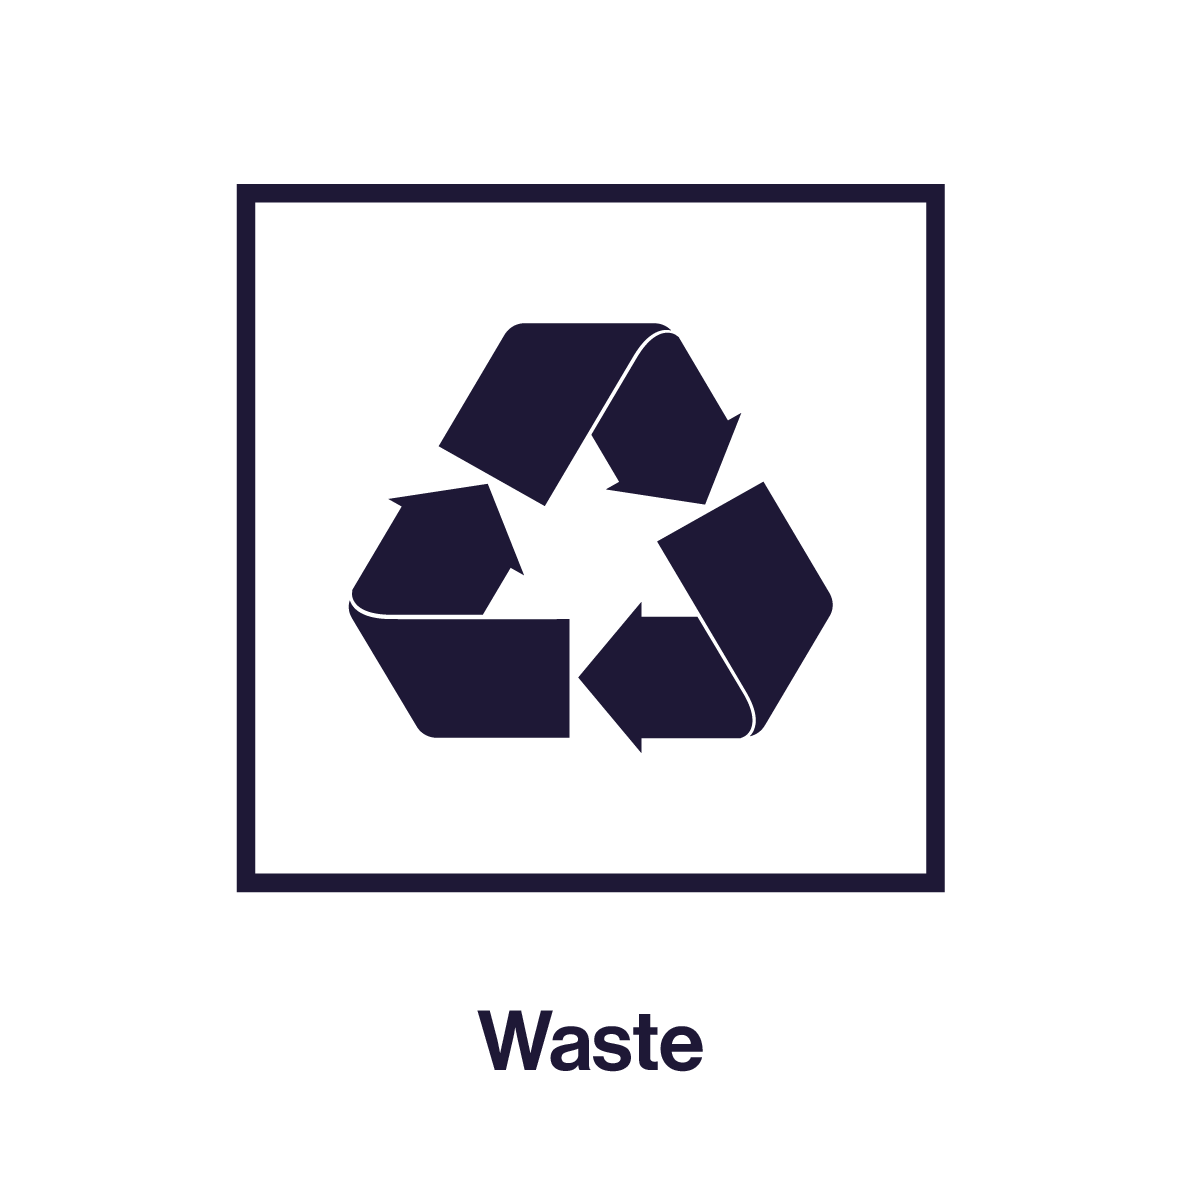 BREEAM assessment category, waste icon